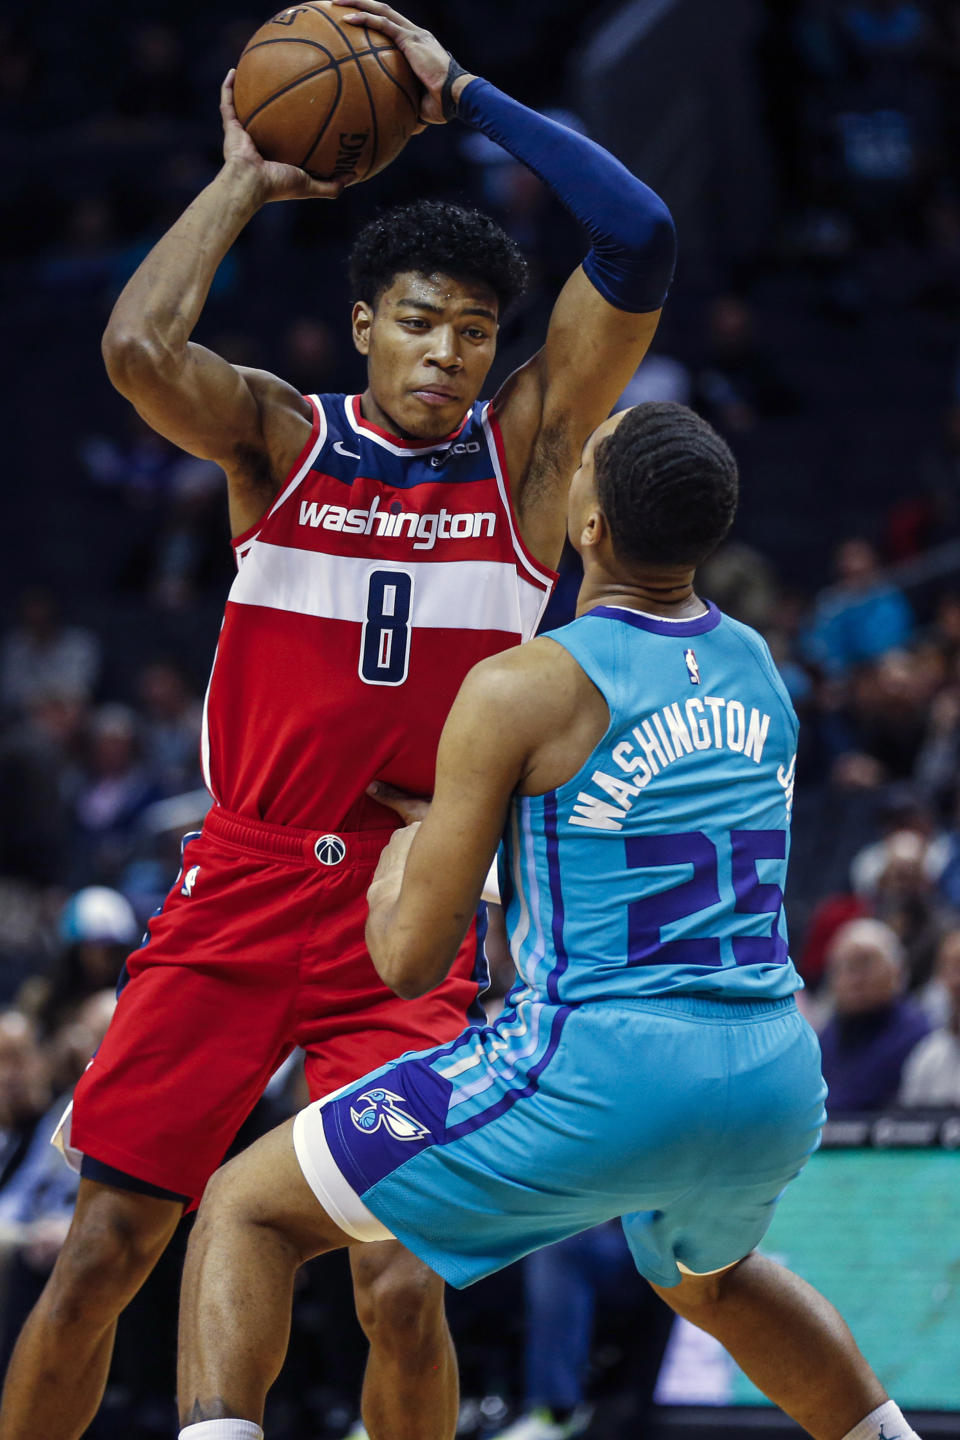 Washington Wizards forward Rui Hachimura, left, looks to drive against Charlotte Hornets forward P.J. Washington in the first half of an NBA basketball game in Charlotte, N.C., Tuesday, Dec. 10, 2019. (AP Photo/Nell Redmond)